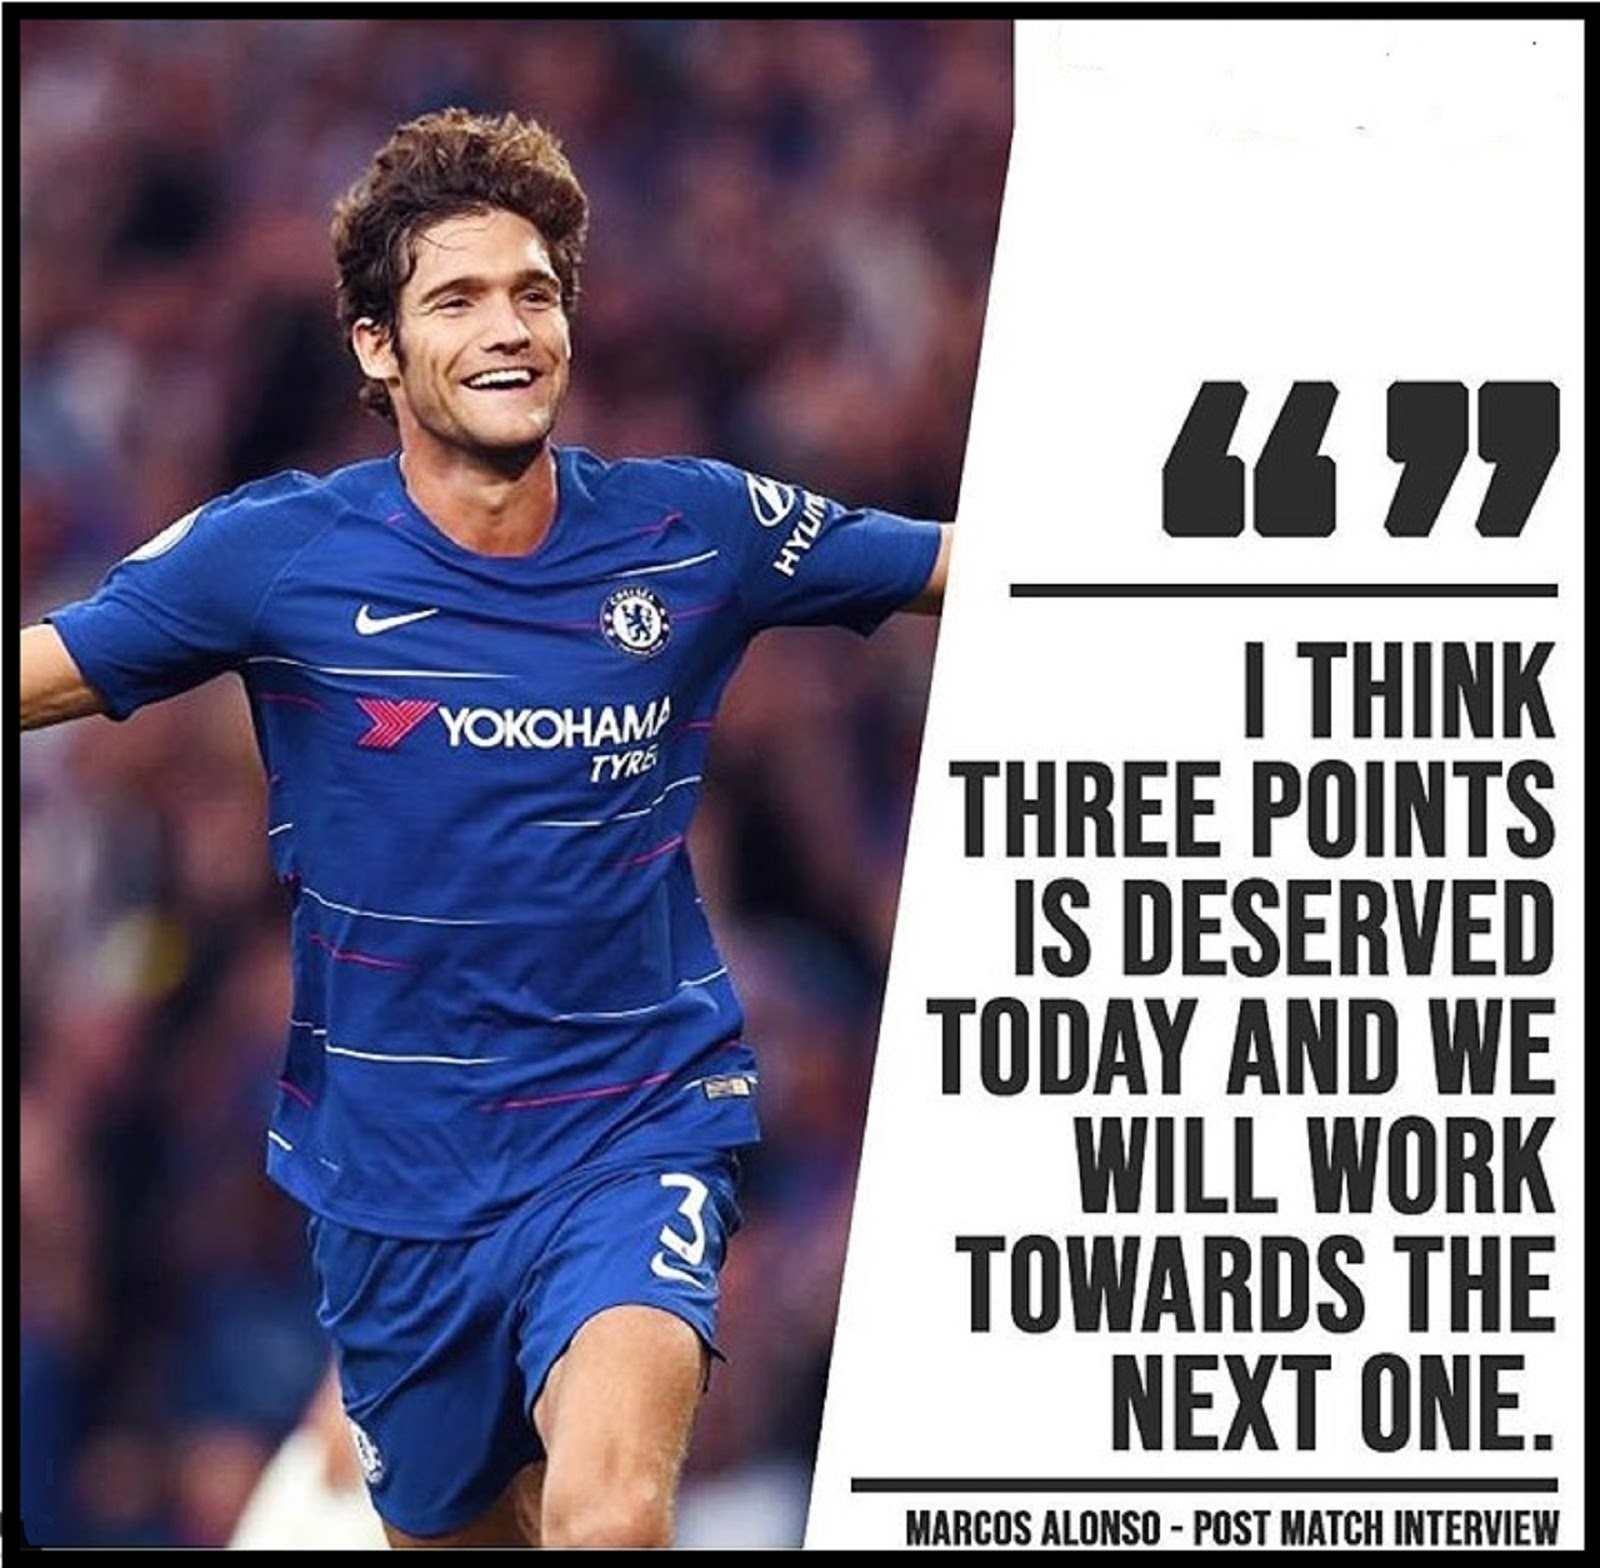 MARCOS ALONSO